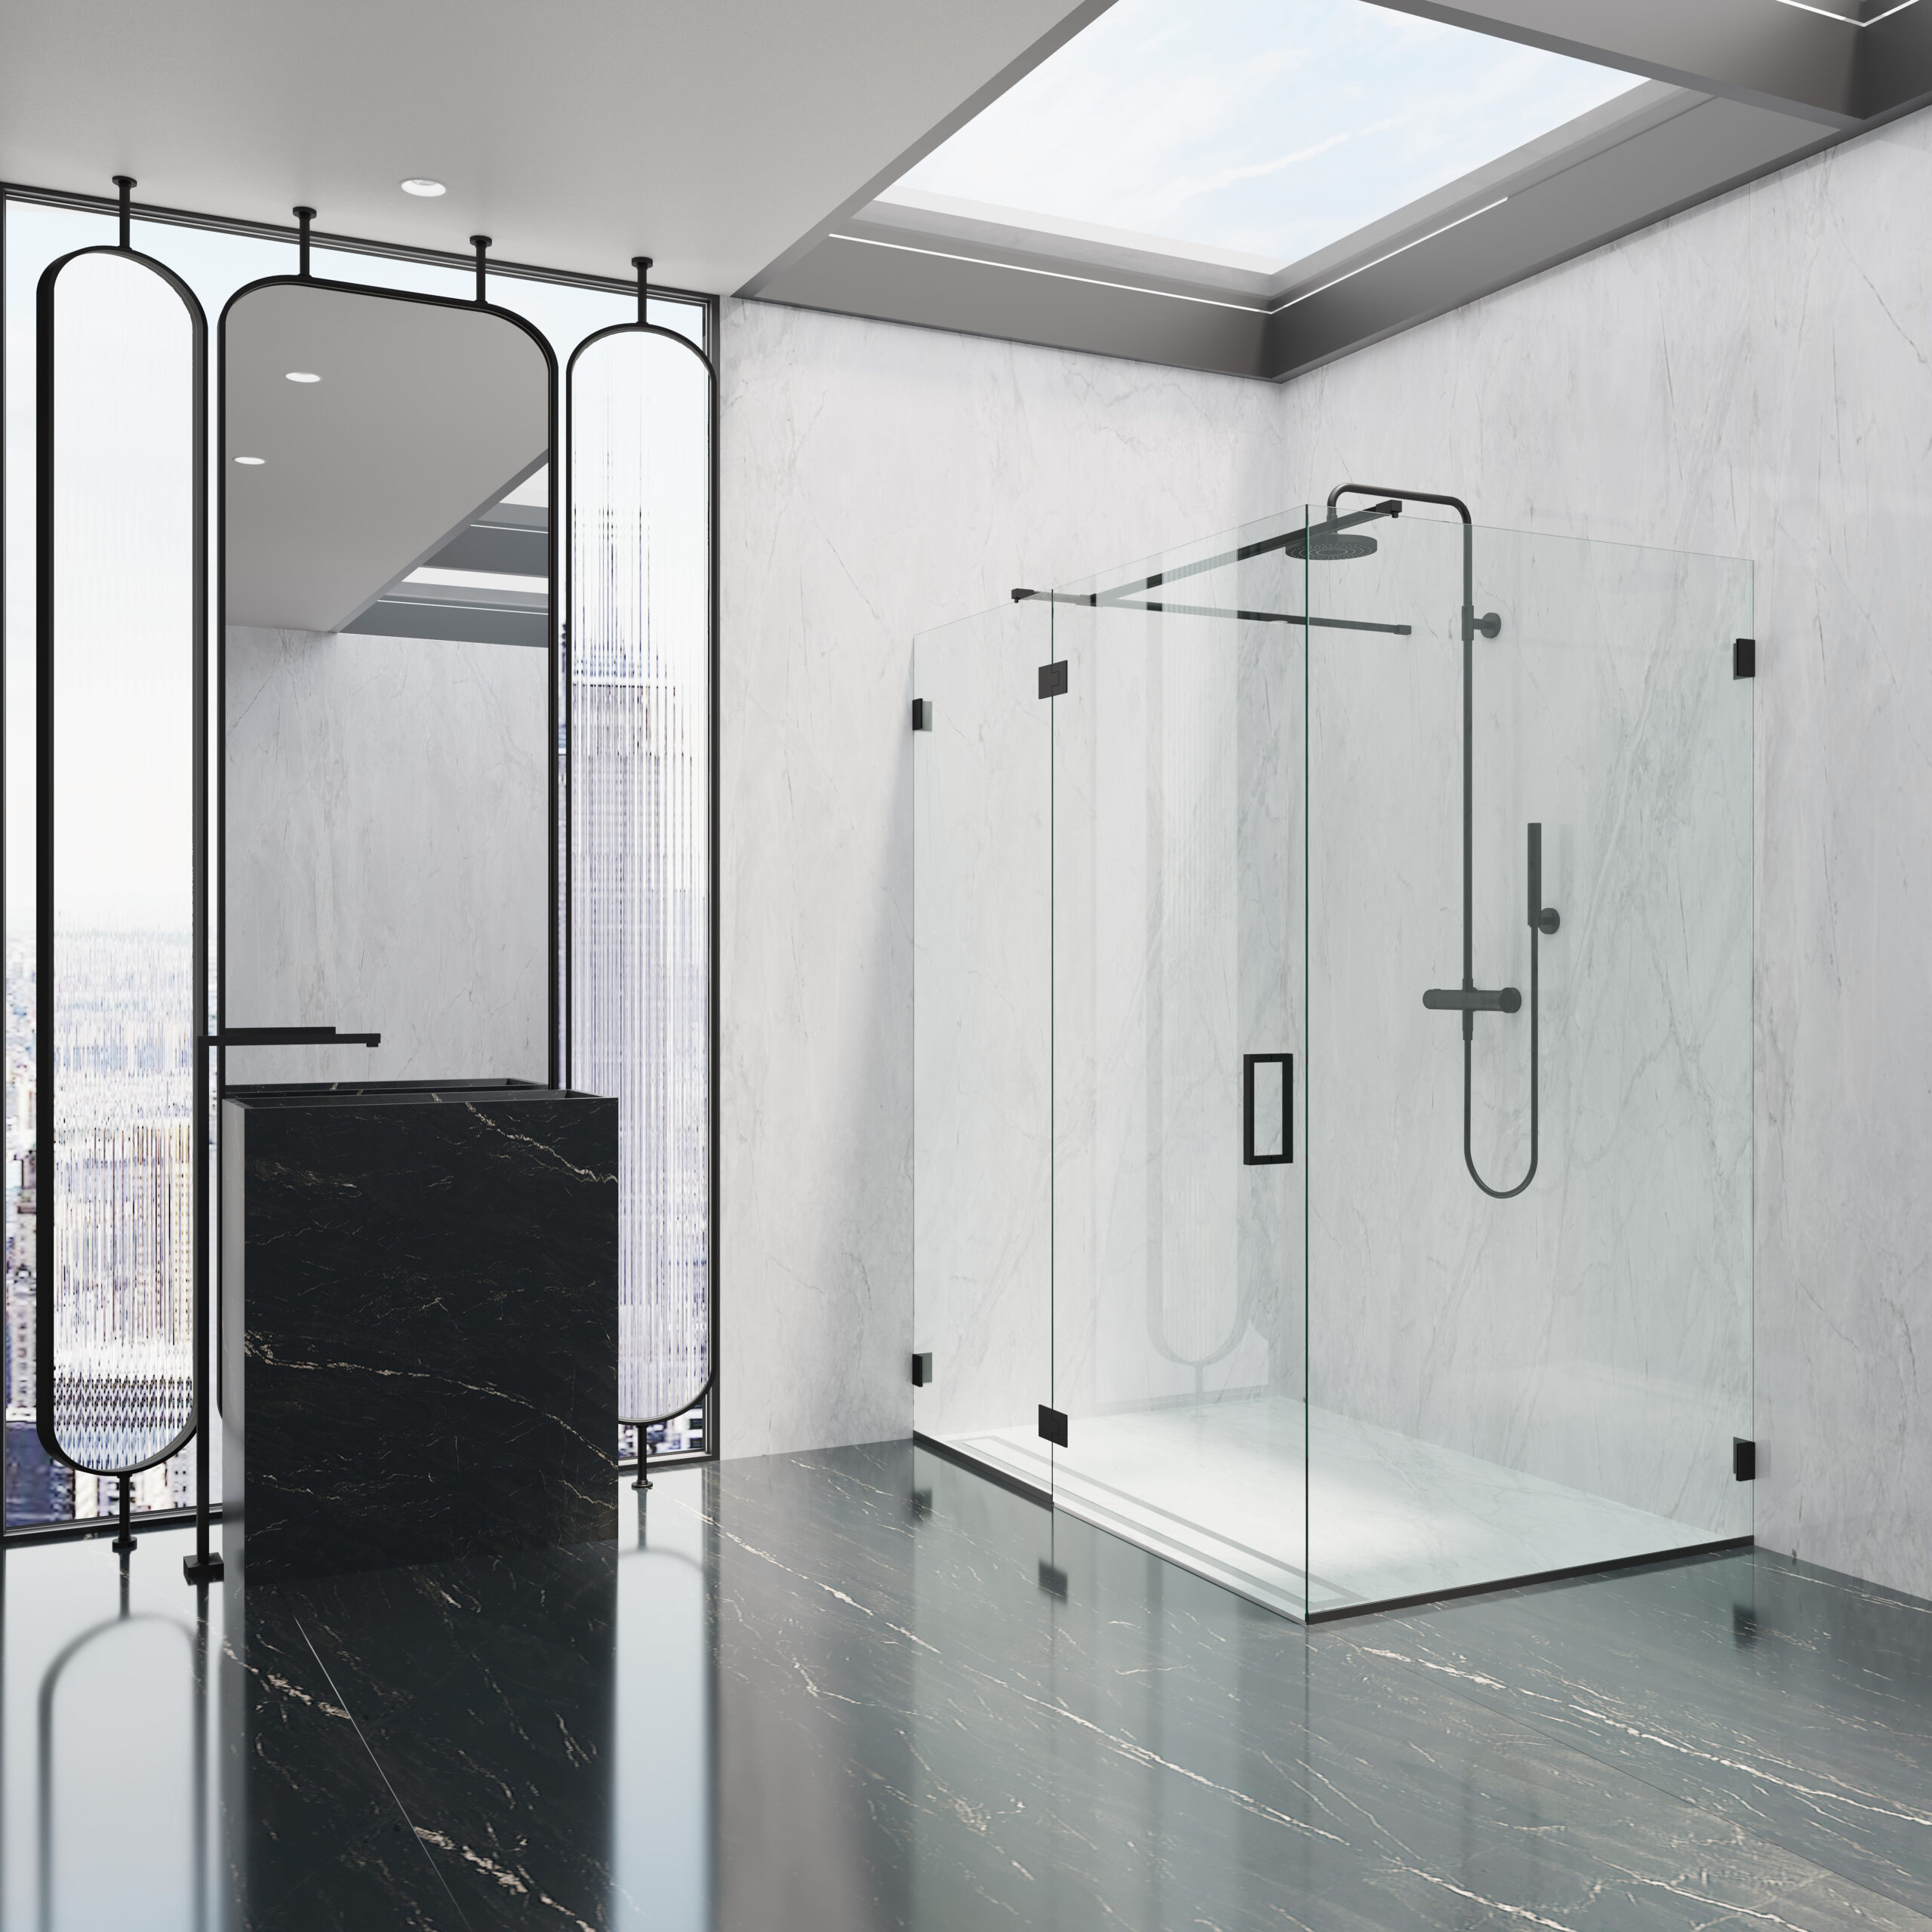 Modern, stylish and on-point: Matte Black shower hardware makes an impression